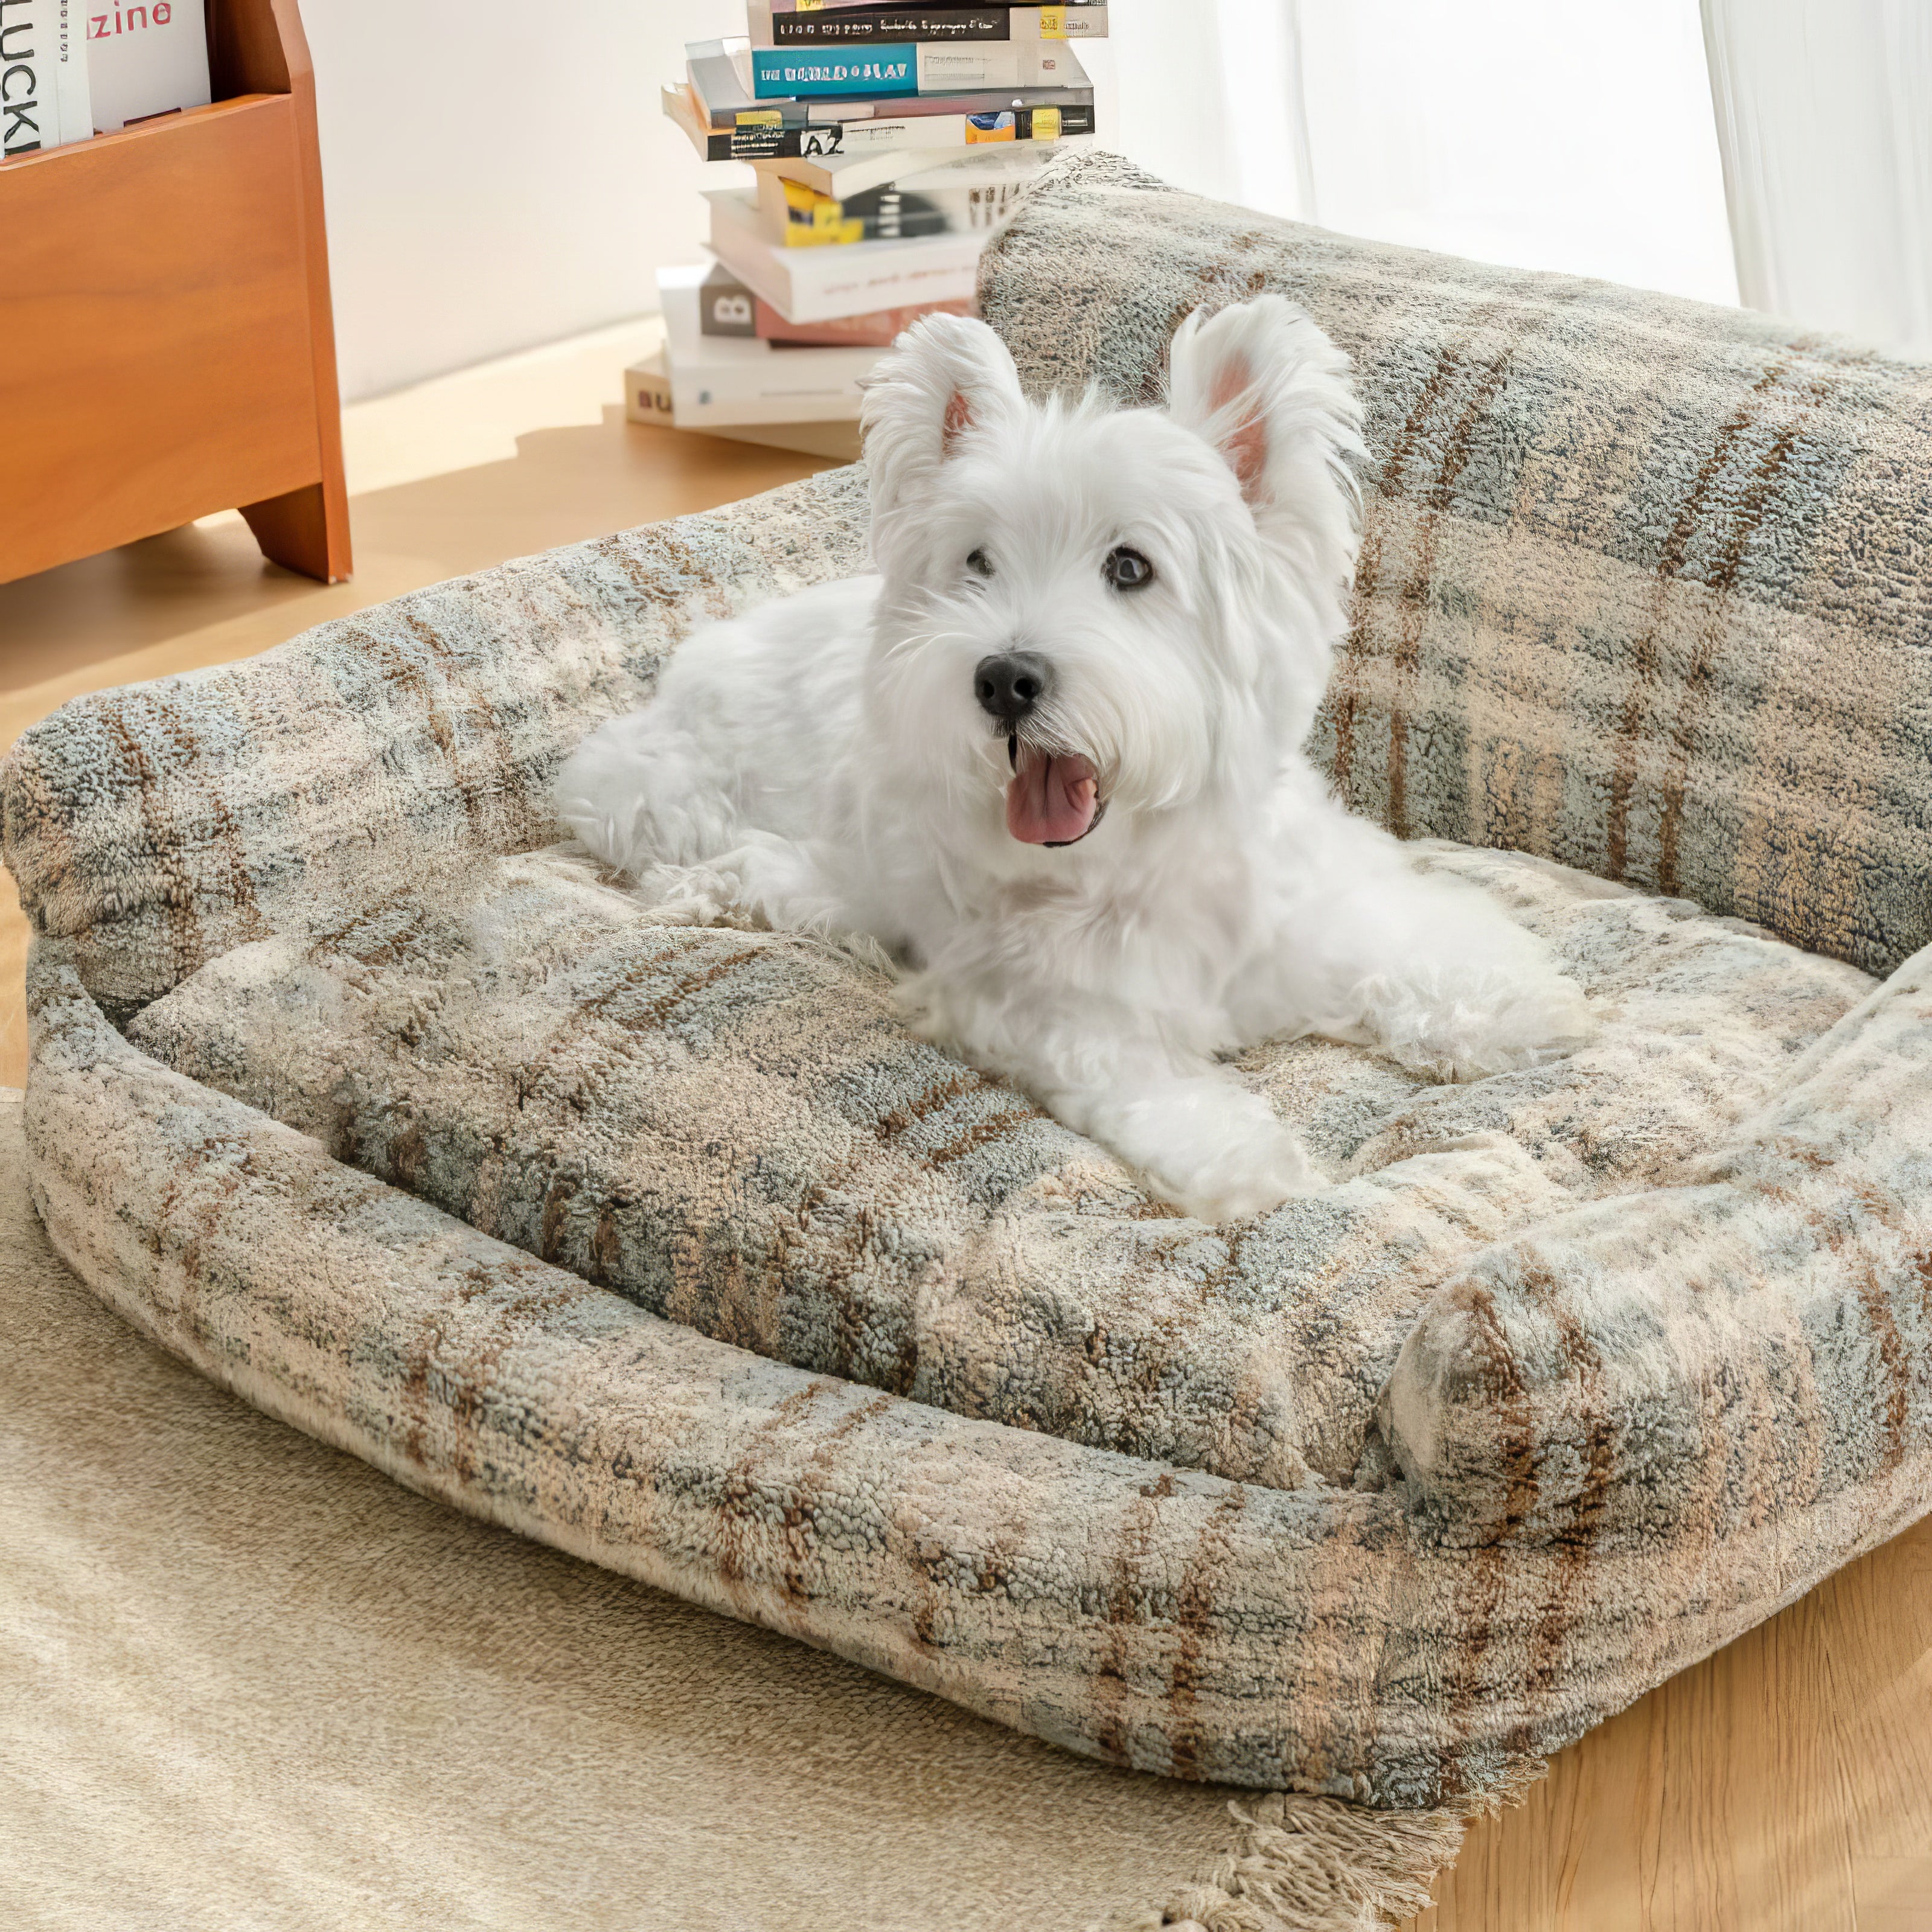 The Soothing Pet Sofa